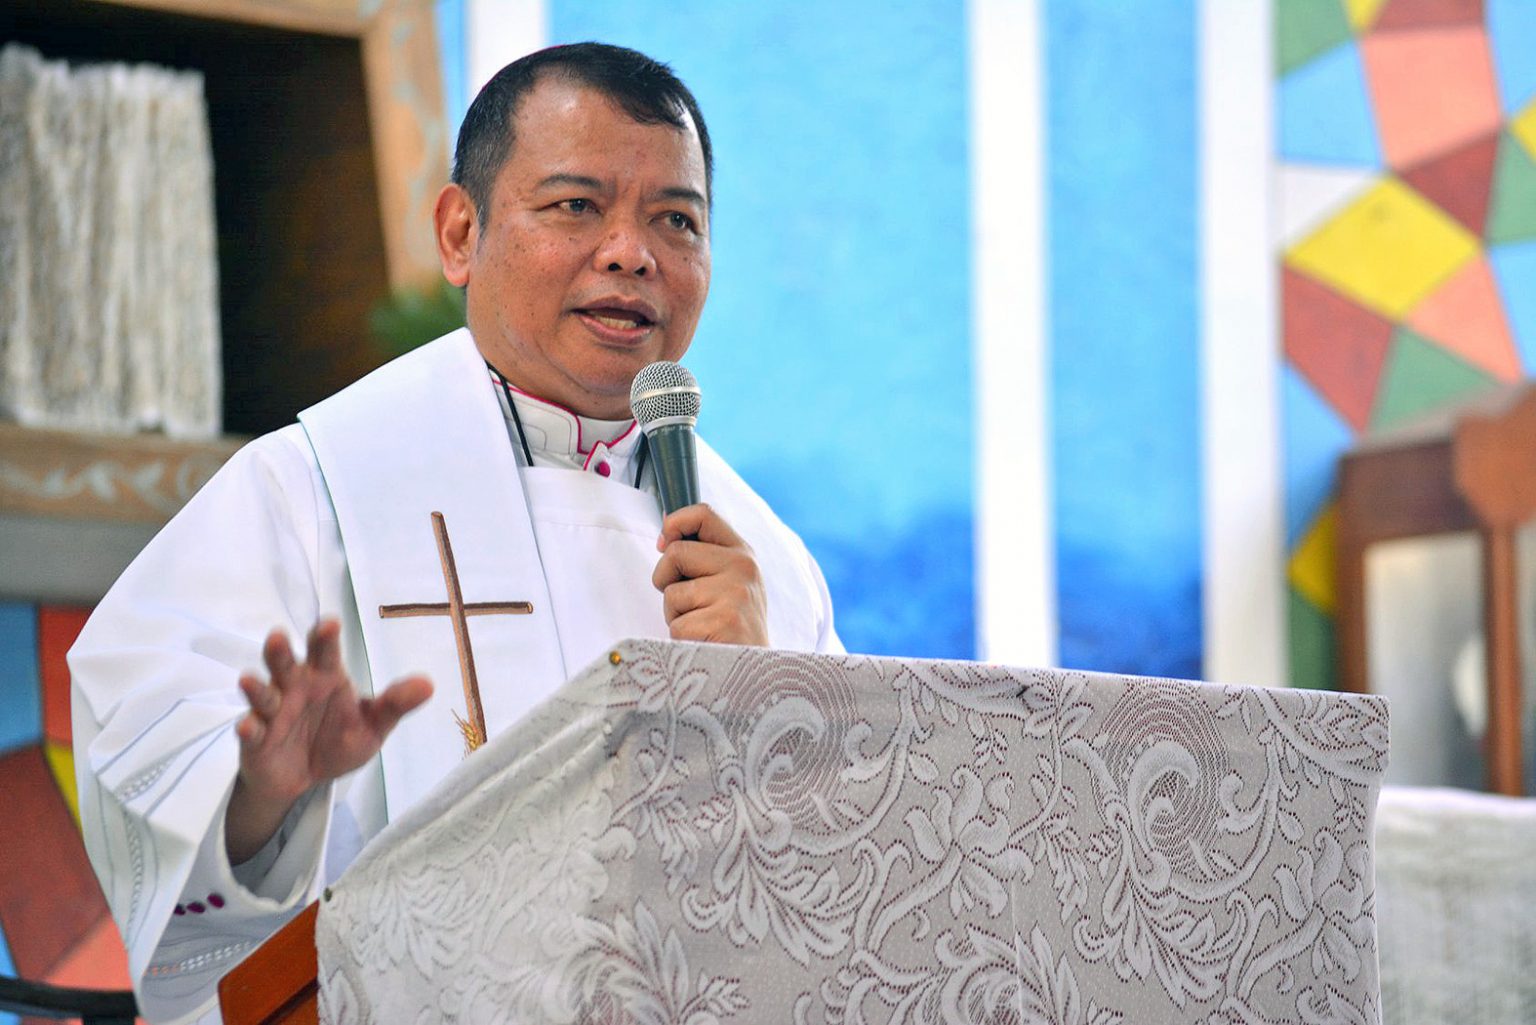 Novaliches bishop: Fight against coronavirus is ‘everybody’s responsibility’